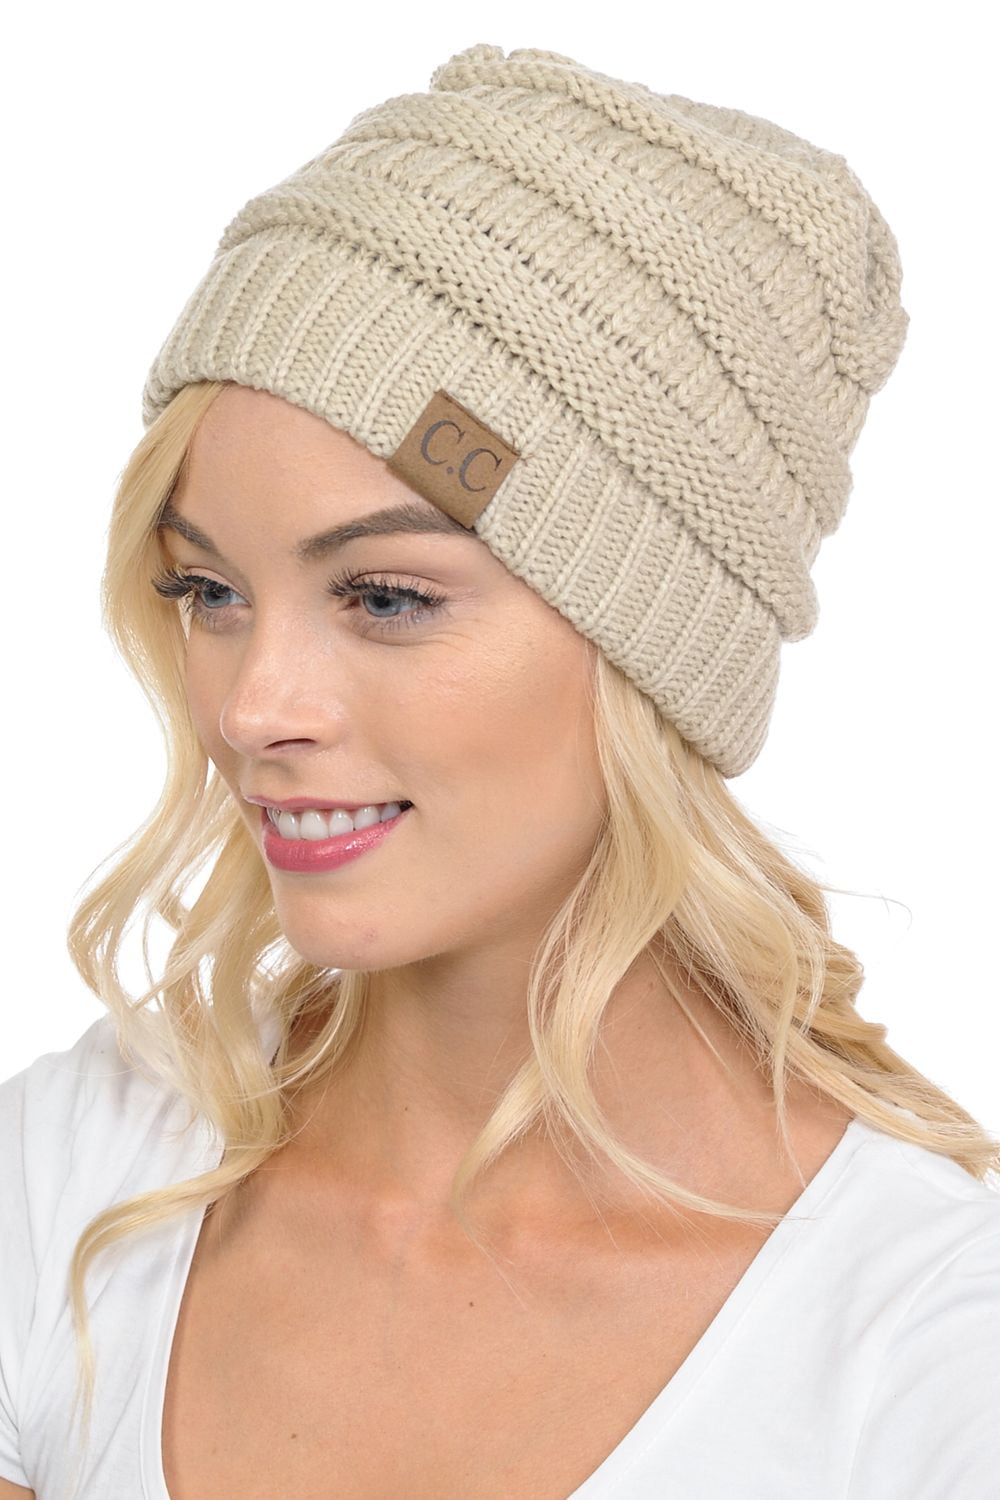 C.C Hat-20A Slouchy Thick Warm Cap Hat Skully Color Cable Knit Beanie ...